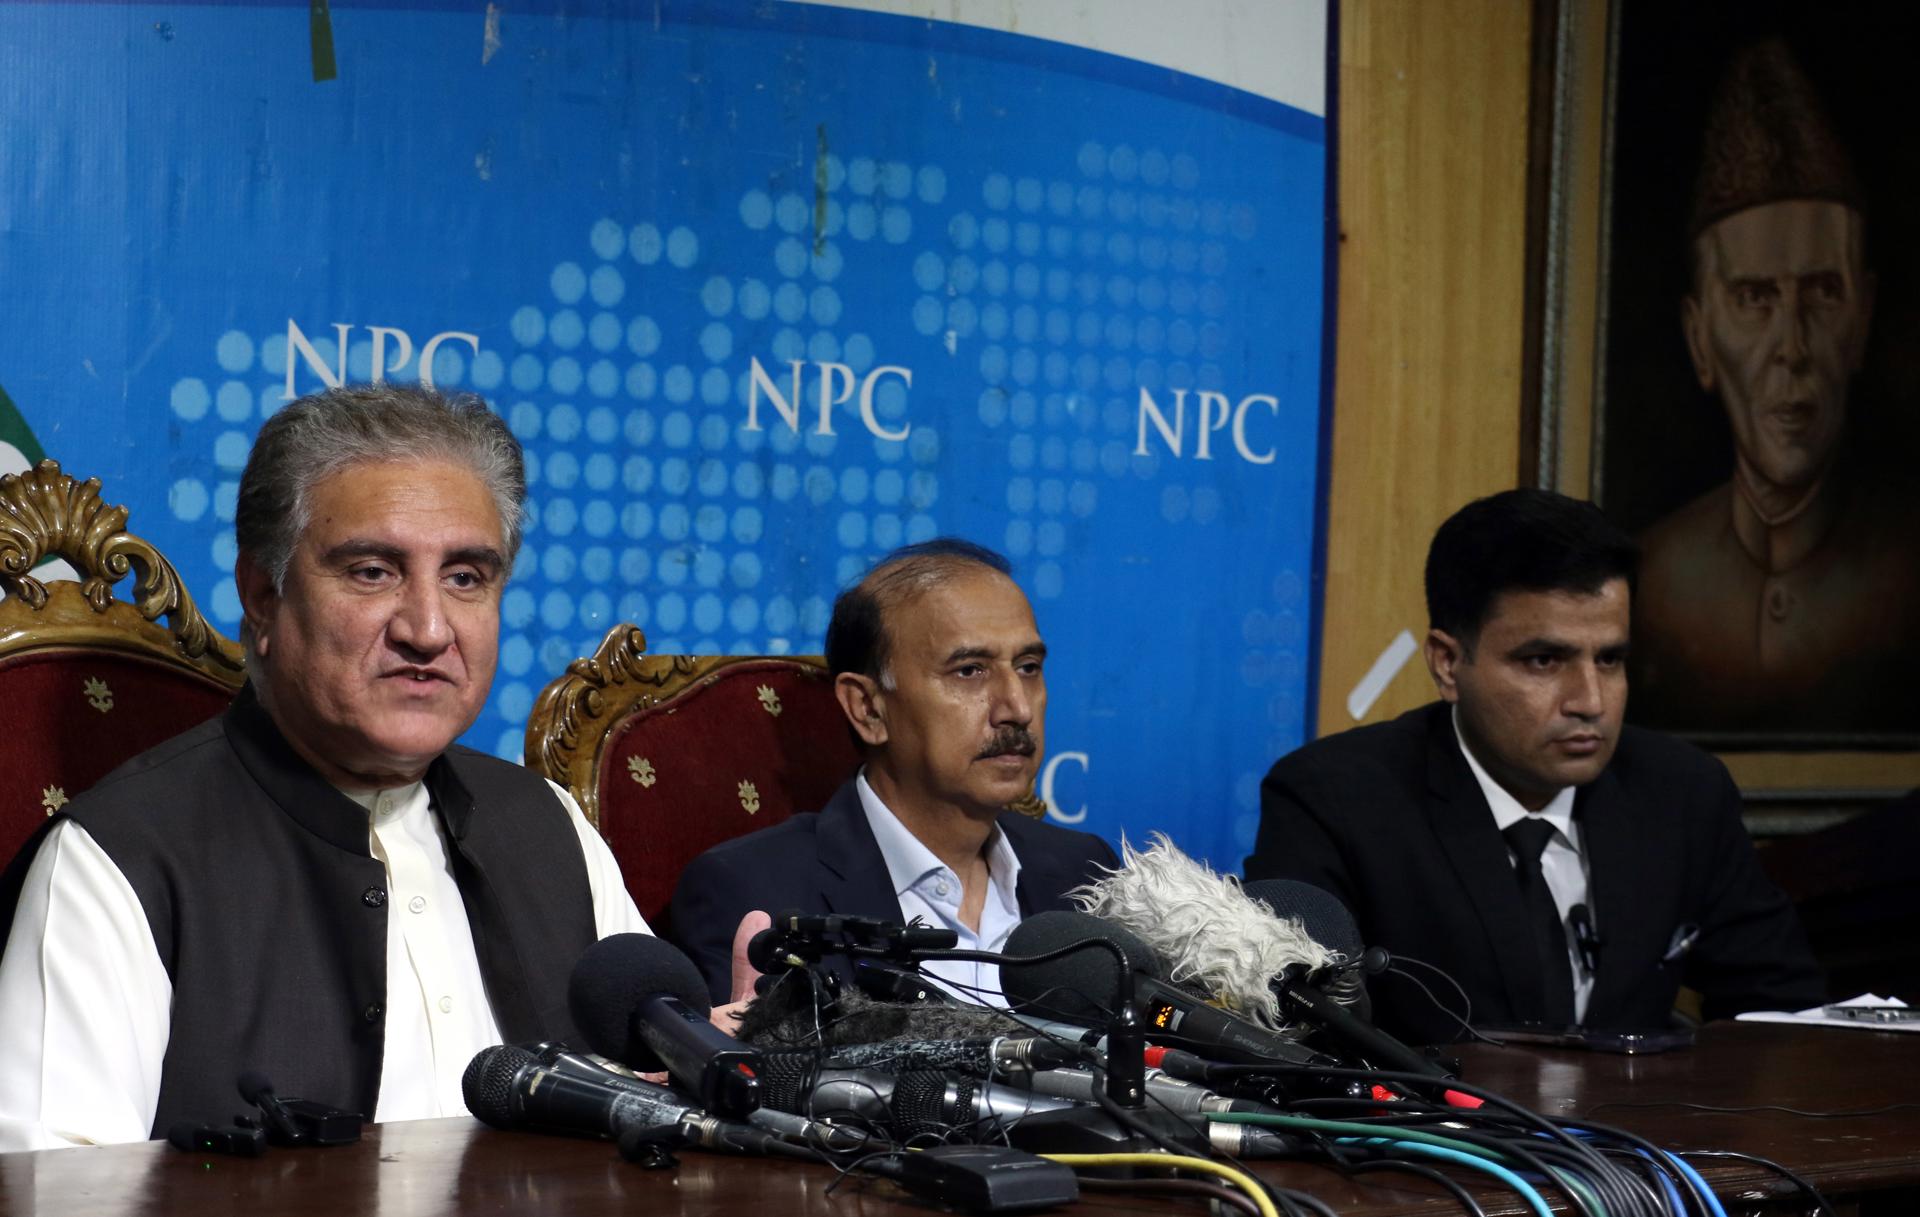 Shah Mehmood Qureshi (L), vice chairman of opposition party Pakistan Tehrik-e-Insaf sits with Shoaib Shaheen (C) and Naeem Haider Panjutha, lawyers of former Prime Minister and PTI head Imran Khan, during a press conference in Islamabad, Pakistan, 07 August 2023. EFE/EPA/SOHAIL SHAHZAD